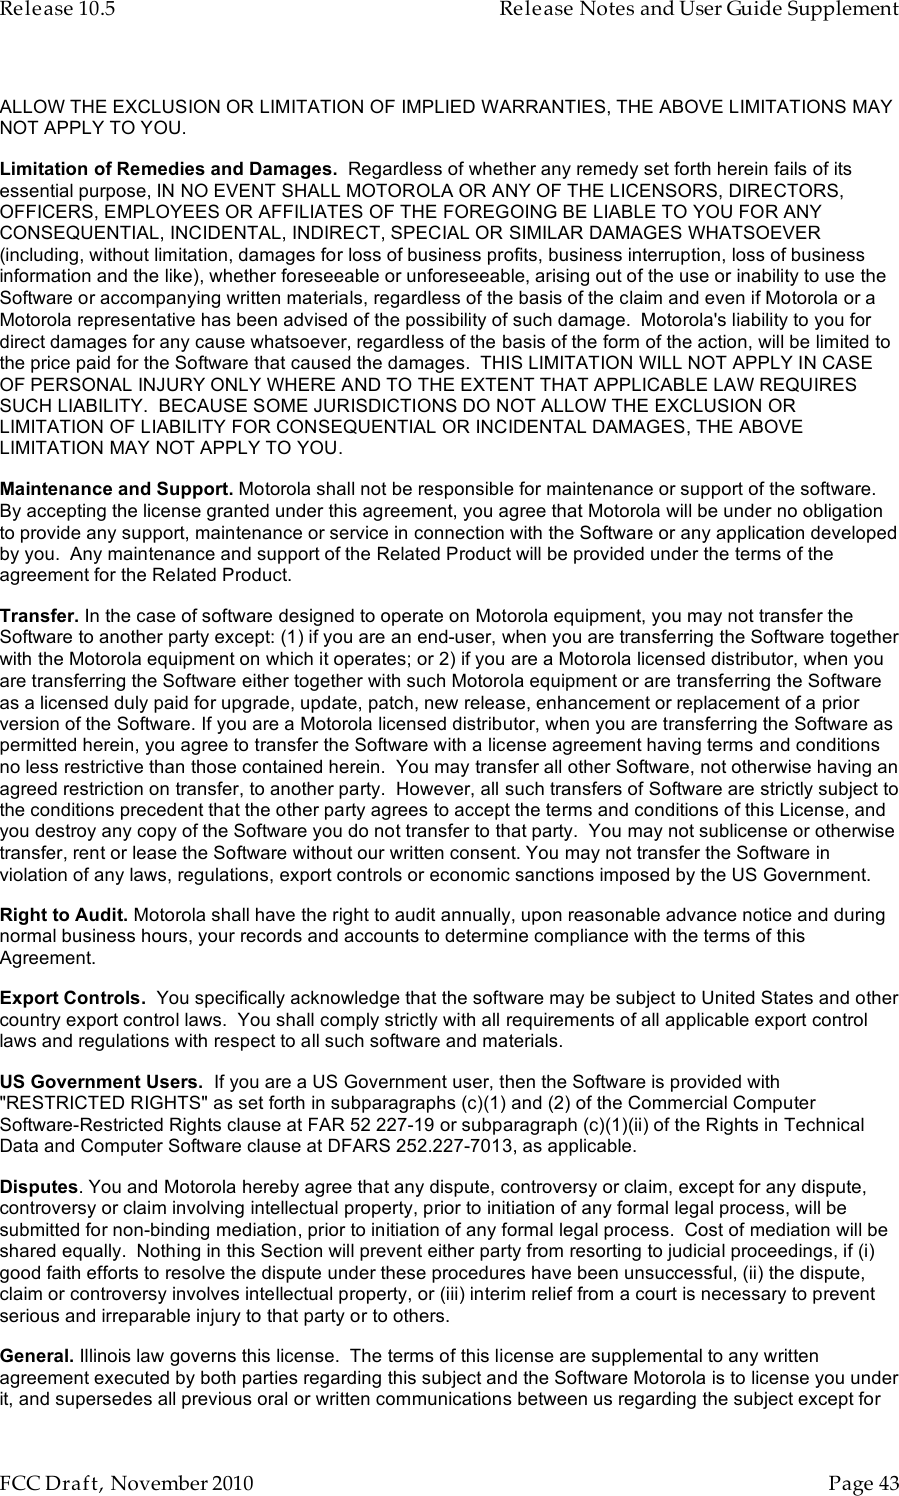 Release 10.5    Release Notes and User Guide Supplement      FCC Draft, November 2010  Page 43   ALLOW THE EXCLUSION OR LIMITATION OF IMPLIED WARRANTIES, THE ABOVE LIMITATIONS MAY NOT APPLY TO YOU. Limitation of Remedies and Damages.  Regardless of whether any remedy set forth herein fails of its essential purpose, IN NO EVENT SHALL MOTOROLA OR ANY OF THE LICENSORS, DIRECTORS, OFFICERS, EMPLOYEES OR AFFILIATES OF THE FOREGOING BE LIABLE TO YOU FOR ANY CONSEQUENTIAL, INCIDENTAL, INDIRECT, SPECIAL OR SIMILAR DAMAGES WHATSOEVER (including, without limitation, damages for loss of business profits, business interruption, loss of business information and the like), whether foreseeable or unforeseeable, arising out of the use or inability to use the Software or accompanying written materials, regardless of the basis of the claim and even if Motorola or a Motorola representative has been advised of the possibility of such damage.  Motorola&apos;s liability to you for direct damages for any cause whatsoever, regardless of the basis of the form of the action, will be limited to the price paid for the Software that caused the damages.  THIS LIMITATION WILL NOT APPLY IN CASE OF PERSONAL INJURY ONLY WHERE AND TO THE EXTENT THAT APPLICABLE LAW REQUIRES SUCH LIABILITY.  BECAUSE SOME JURISDICTIONS DO NOT ALLOW THE EXCLUSION OR LIMITATION OF LIABILITY FOR CONSEQUENTIAL OR INCIDENTAL DAMAGES, THE ABOVE LIMITATION MAY NOT APPLY TO YOU. Maintenance and Support. Motorola shall not be responsible for maintenance or support of the software.  By accepting the license granted under this agreement, you agree that Motorola will be under no obligation to provide any support, maintenance or service in connection with the Software or any application developed by you.  Any maintenance and support of the Related Product will be provided under the terms of the agreement for the Related Product. Transfer. In the case of software designed to operate on Motorola equipment, you may not transfer the Software to another party except: (1) if you are an end-user, when you are transferring the Software together with the Motorola equipment on which it operates; or 2) if you are a Motorola licensed distributor, when you are transferring the Software either together with such Motorola equipment or are transferring the Software as a licensed duly paid for upgrade, update, patch, new release, enhancement or replacement of a prior version of the Software. If you are a Motorola licensed distributor, when you are transferring the Software as permitted herein, you agree to transfer the Software with a license agreement having terms and conditions no less restrictive than those contained herein.  You may transfer all other Software, not otherwise having an agreed restriction on transfer, to another party.  However, all such transfers of Software are strictly subject to the conditions precedent that the other party agrees to accept the terms and conditions of this License, and you destroy any copy of the Software you do not transfer to that party.  You may not sublicense or otherwise transfer, rent or lease the Software without our written consent. You may not transfer the Software in violation of any laws, regulations, export controls or economic sanctions imposed by the US Government. Right to Audit. Motorola shall have the right to audit annually, upon reasonable advance notice and during normal business hours, your records and accounts to determine compliance with the terms of this Agreement.  Export Controls.  You specifically acknowledge that the software may be subject to United States and other country export control laws.  You shall comply strictly with all requirements of all applicable export control laws and regulations with respect to all such software and materials. US Government Users.  If you are a US Government user, then the Software is provided with &quot;RESTRICTED RIGHTS&quot; as set forth in subparagraphs (c)(1) and (2) of the Commercial Computer Software-Restricted Rights clause at FAR 52 227-19 or subparagraph (c)(1)(ii) of the Rights in Technical Data and Computer Software clause at DFARS 252.227-7013, as applicable. Disputes. You and Motorola hereby agree that any dispute, controversy or claim, except for any dispute, controversy or claim involving intellectual property, prior to initiation of any formal legal process, will be submitted for non-binding mediation, prior to initiation of any formal legal process.  Cost of mediation will be shared equally.  Nothing in this Section will prevent either party from resorting to judicial proceedings, if (i) good faith efforts to resolve the dispute under these procedures have been unsuccessful, (ii) the dispute, claim or controversy involves intellectual property, or (iii) interim relief from a court is necessary to prevent serious and irreparable injury to that party or to others. General. Illinois law governs this license.  The terms of this license are supplemental to any written agreement executed by both parties regarding this subject and the Software Motorola is to license you under it, and supersedes all previous oral or written communications between us regarding the subject except for 